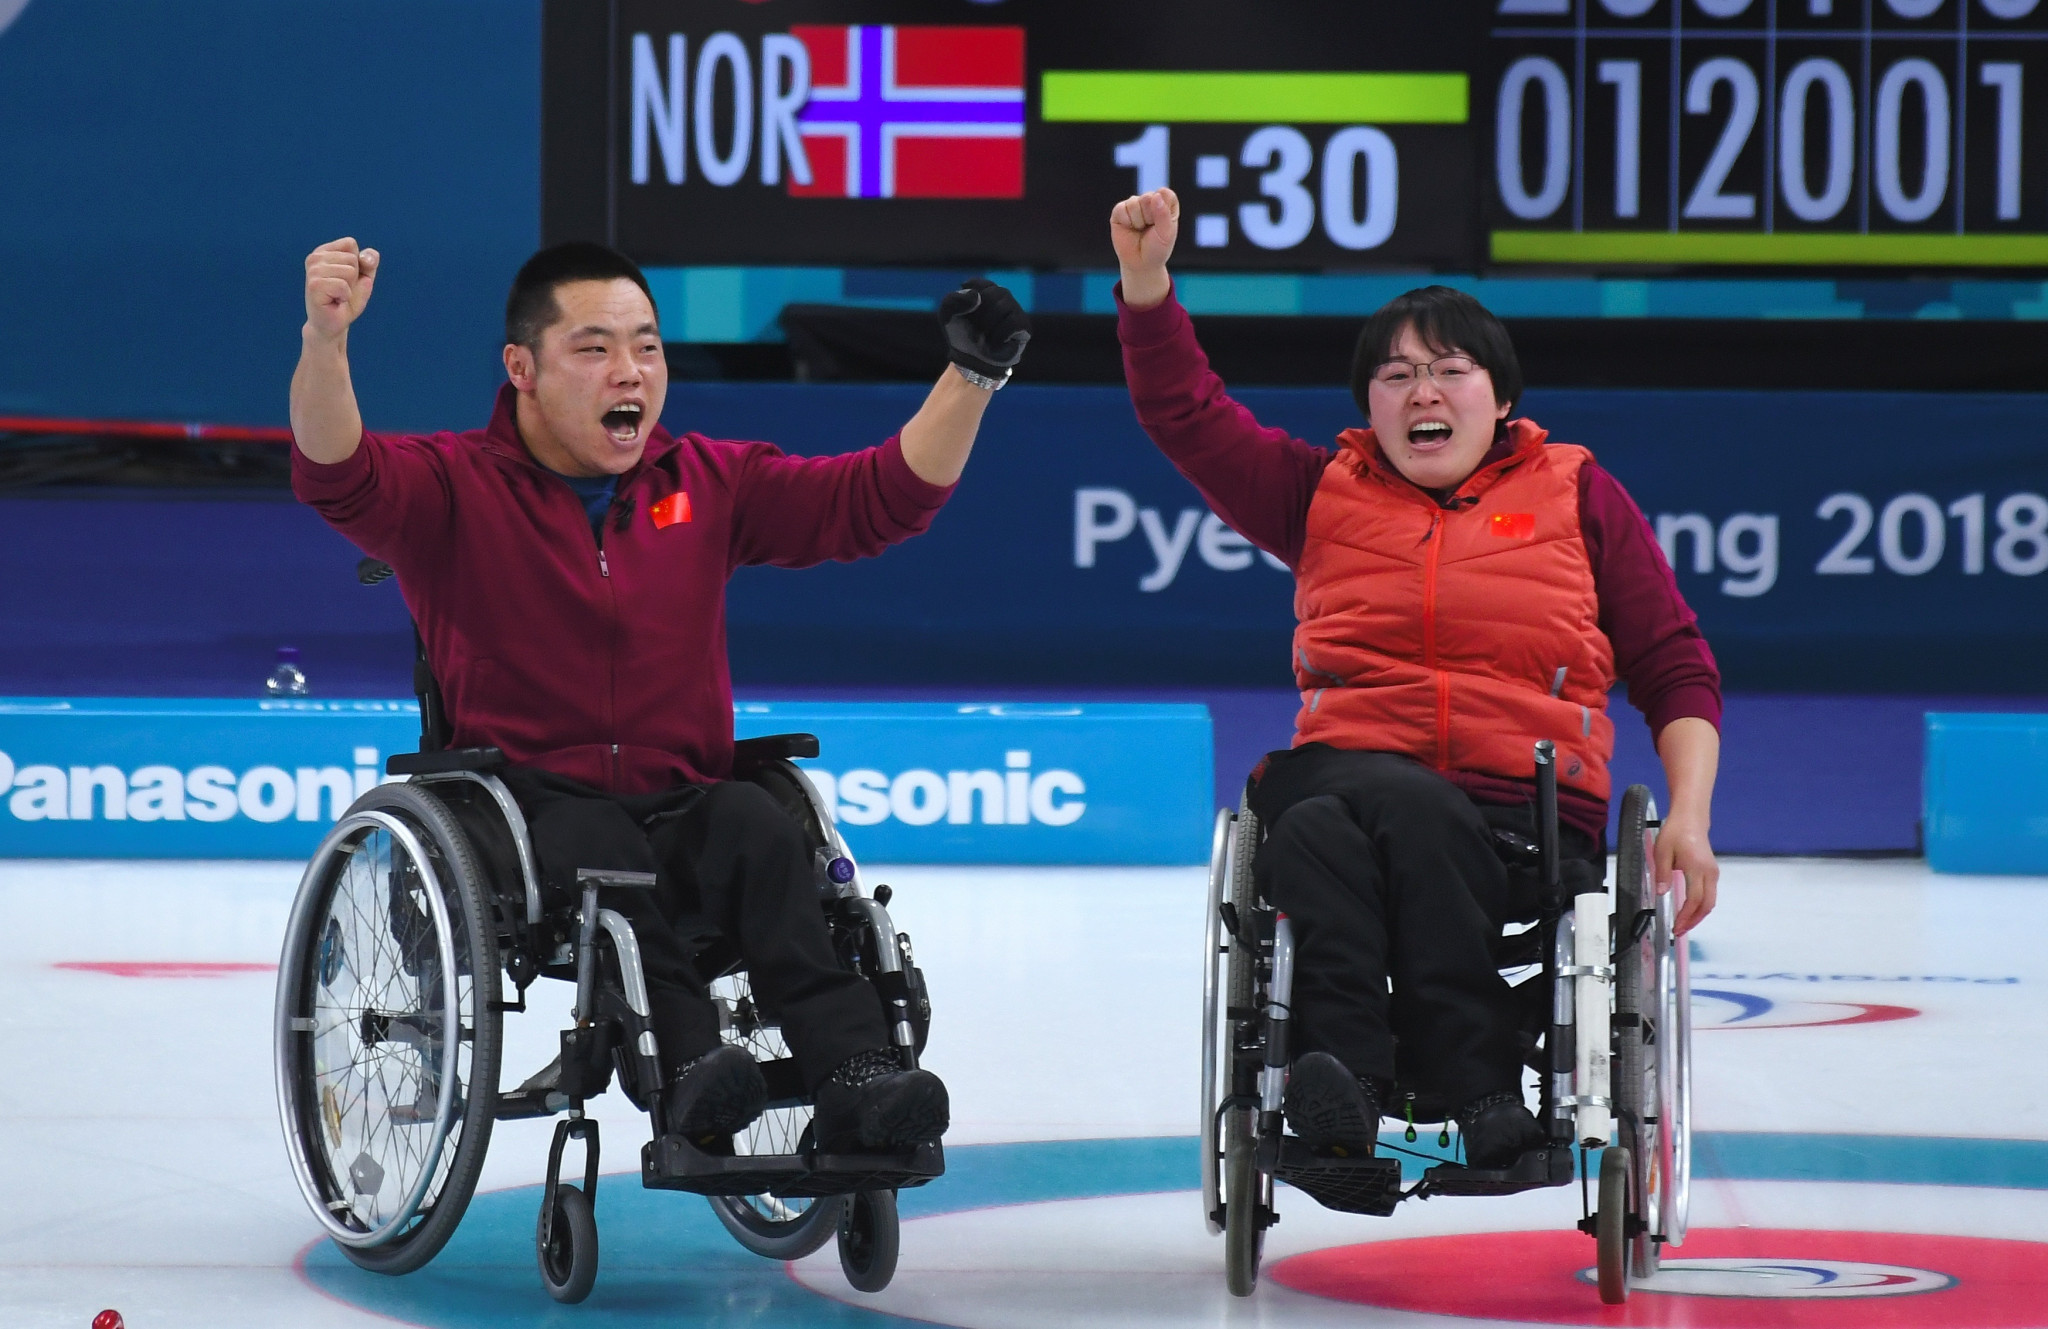 China secured their maiden Winter Paralympic medal with victory in the wheelchair curling final ©Getty Images